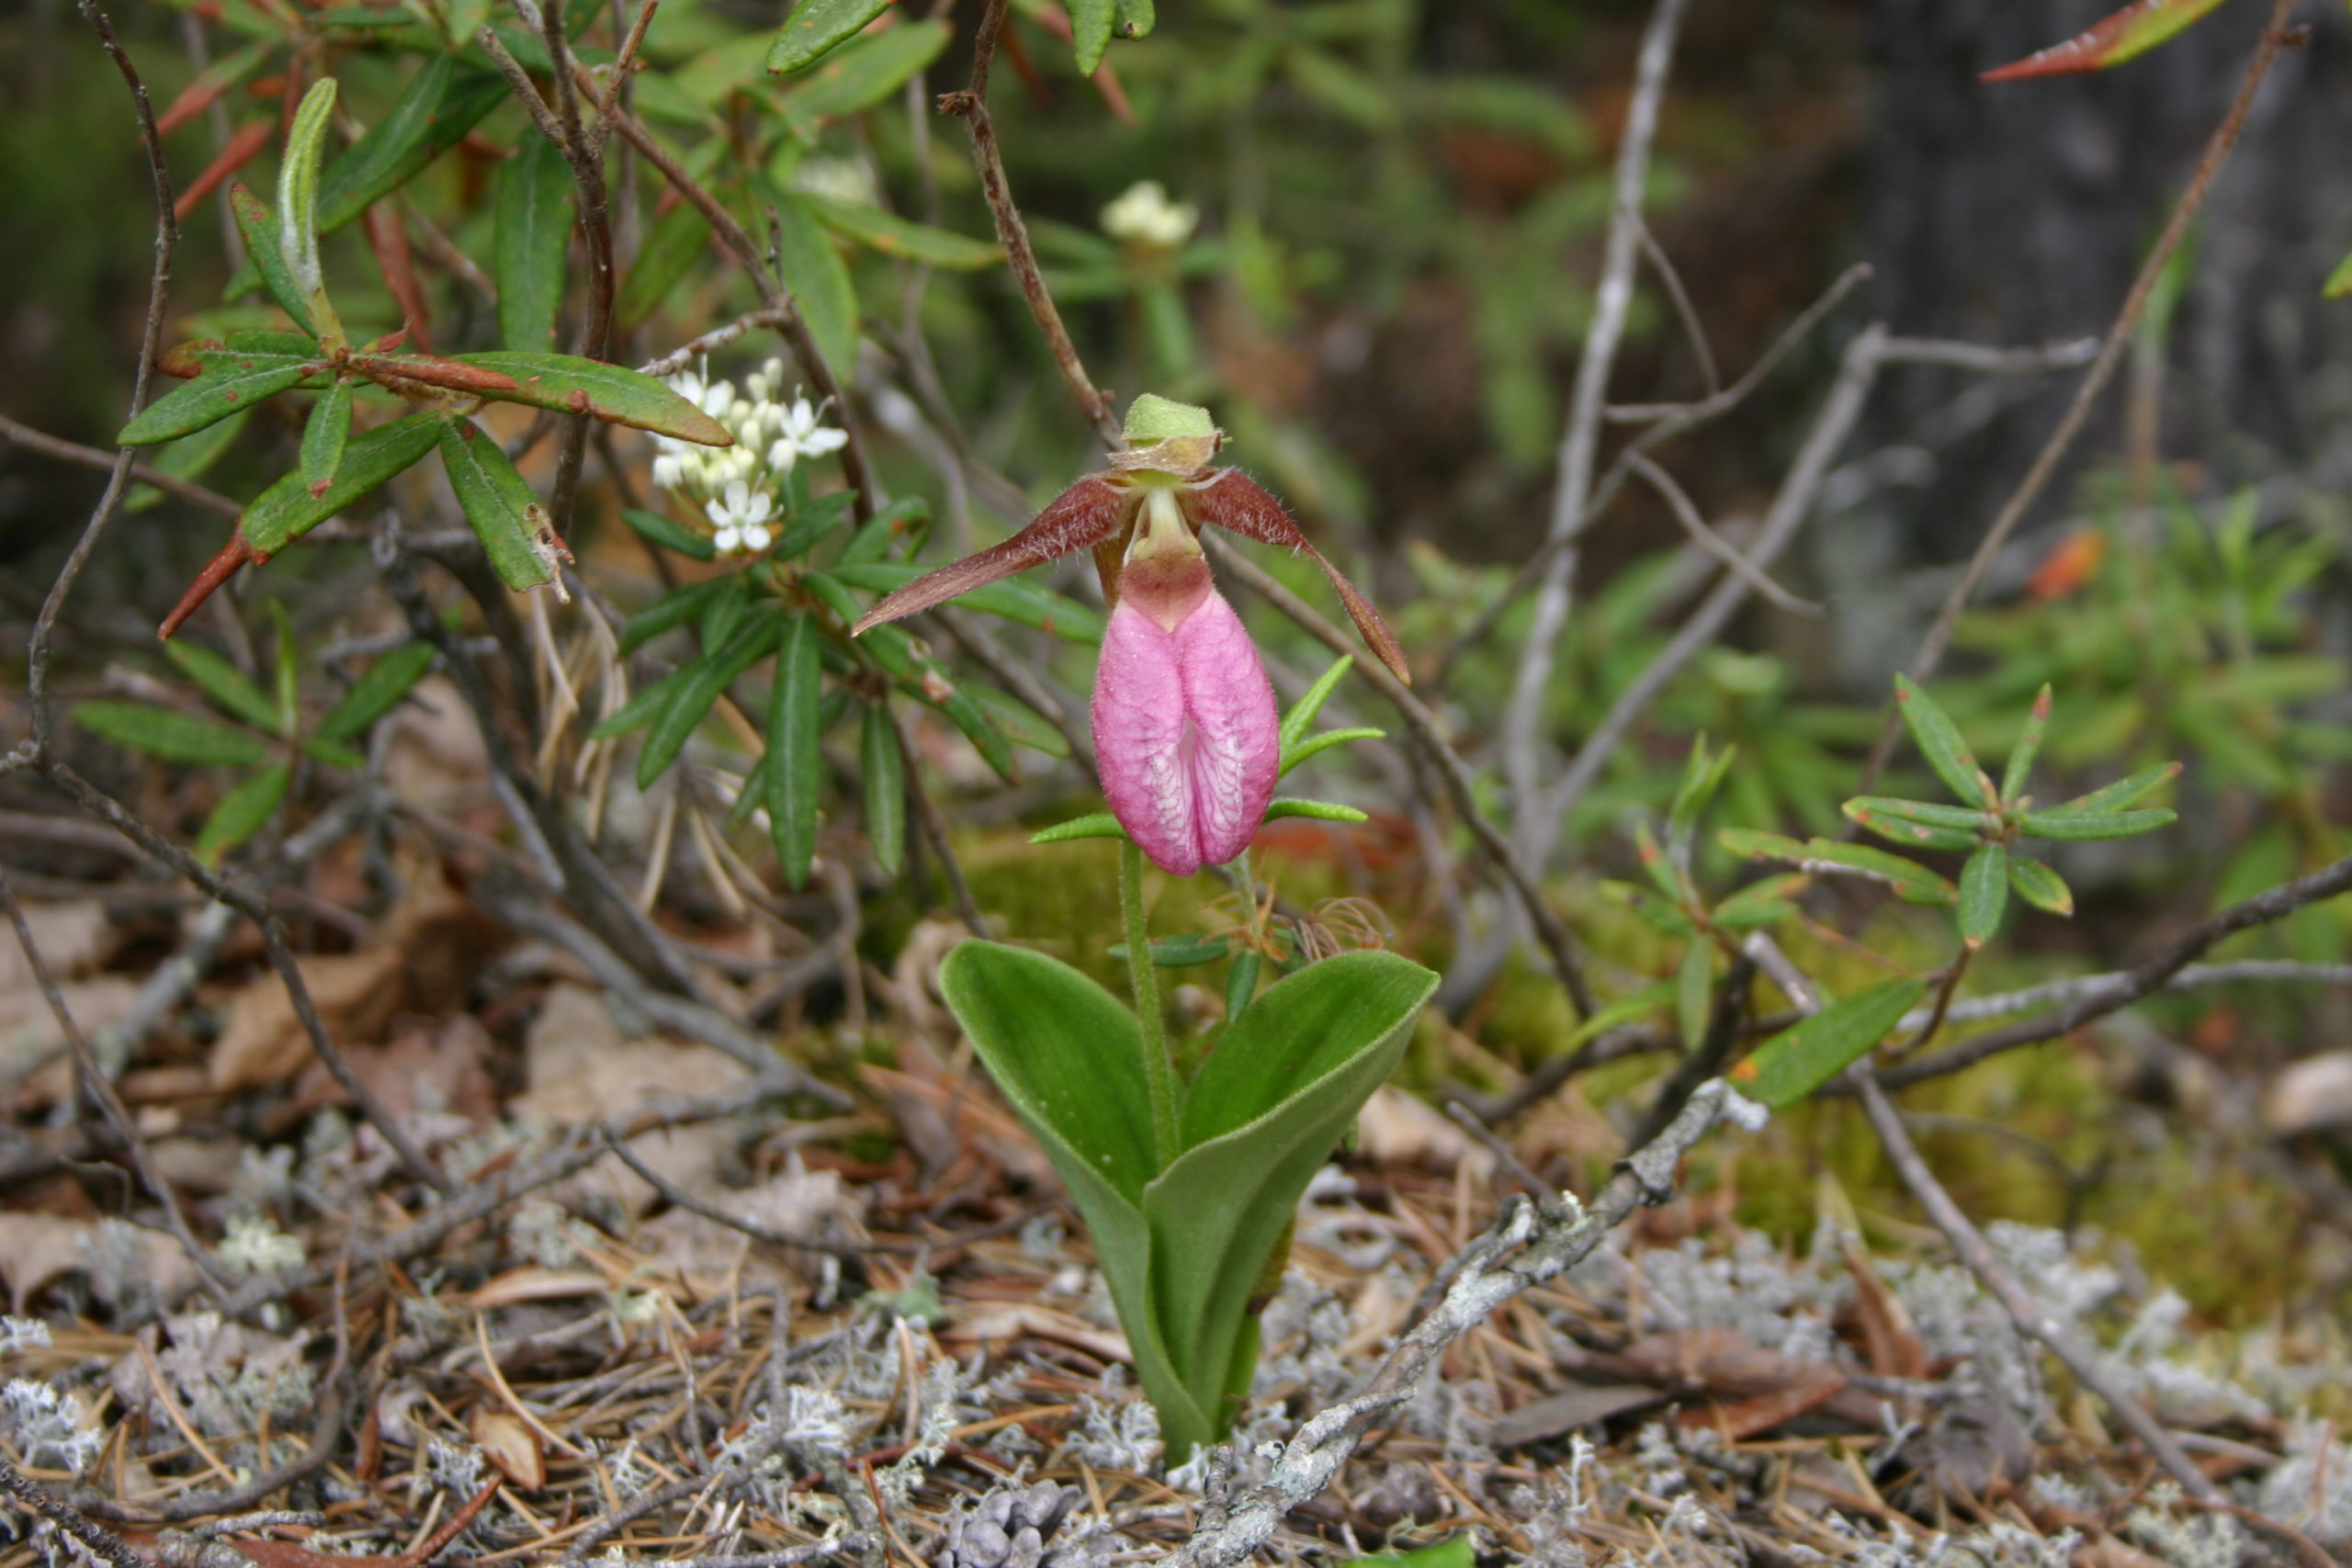 A small plant growing from a wooded ground. The plant is topped by a flower with large, drooping pink petals. Two large leaves encircle the stem at the base.